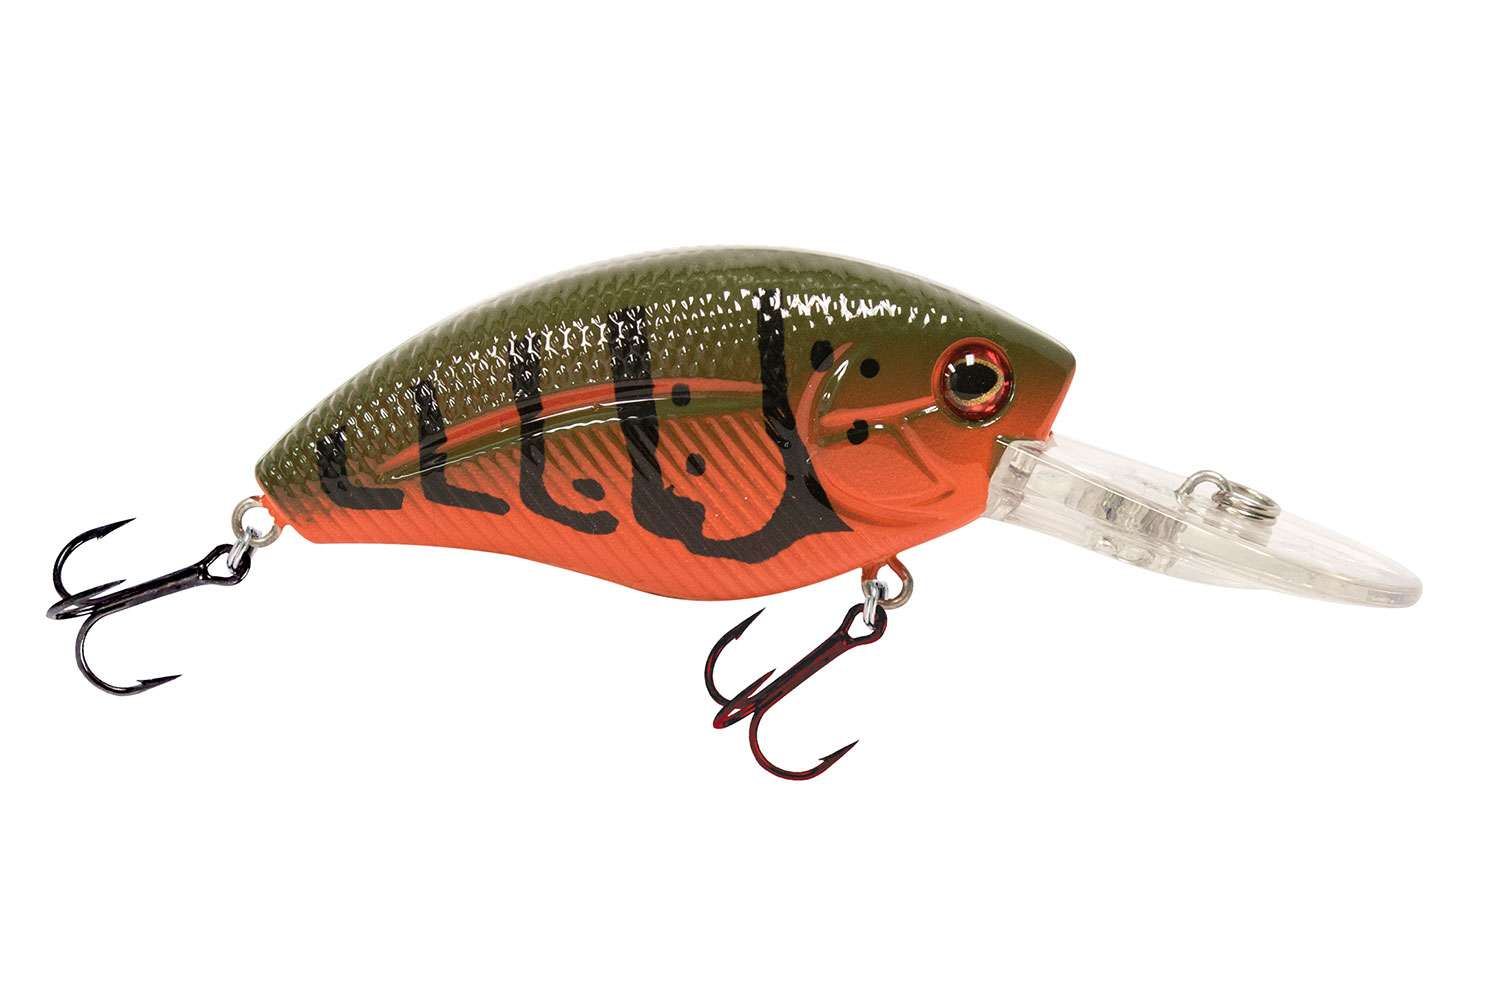 <b>Livingston Howeller DMC Jr.</b><br>
The Howeller DMC Jr. is a slightly smaller version of the championship-winning Howeller Dream Master Classic, and a must-have addition to your crankbait box. With a length of 2.1 inches and weighing in at 0.85 ounces. the Howeller DMC Jr runs at medium depths and produces a wide, strong wobble with fast, enticing action. Throw in the power of EBS TechnologyTM and you have a championship-winning crankbait that draws fish from double the distance of regular baits
